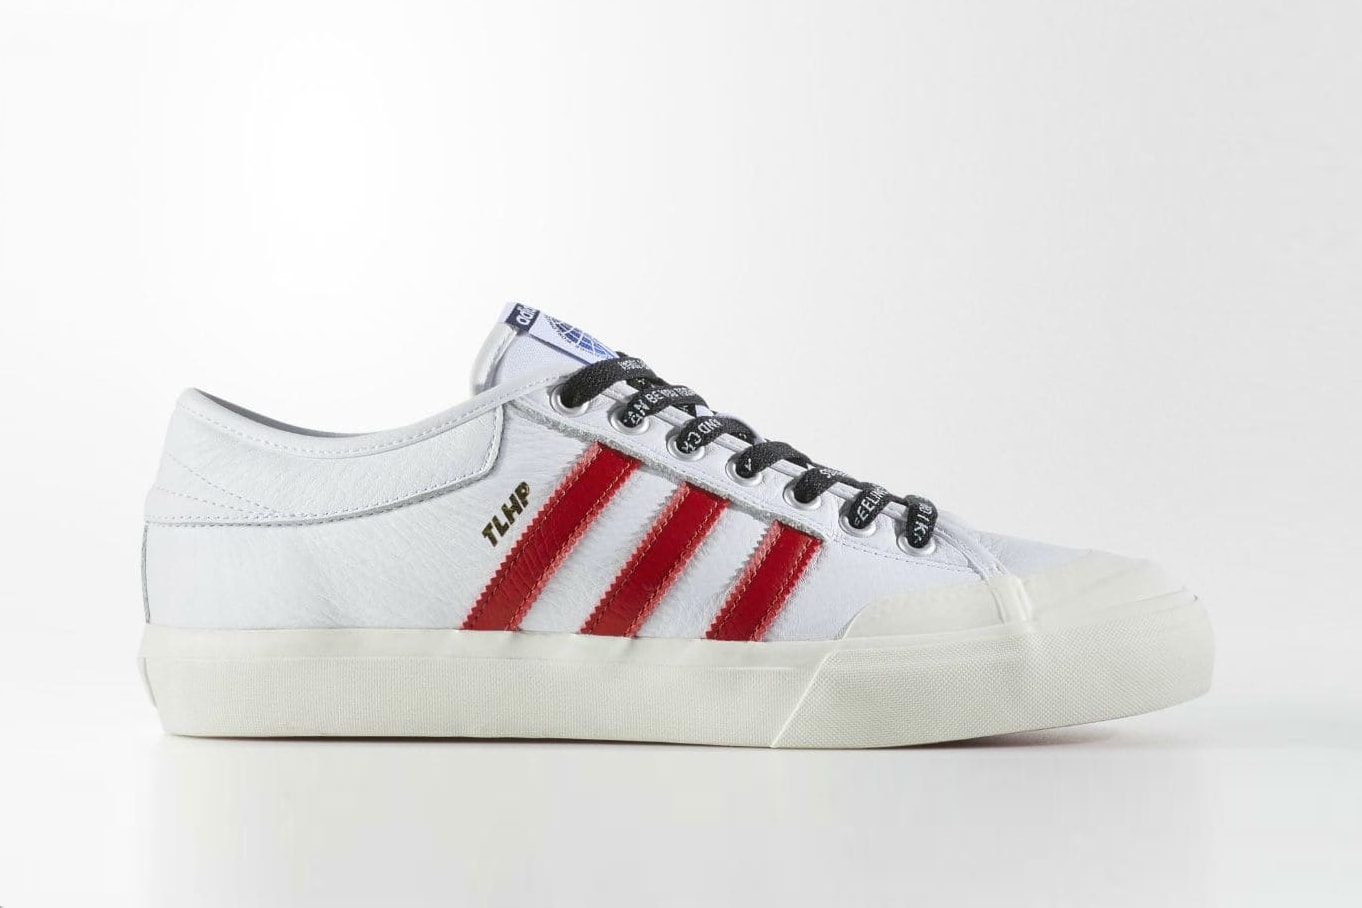 ASAP Ferg's "Trap Lord" Collection With adidas